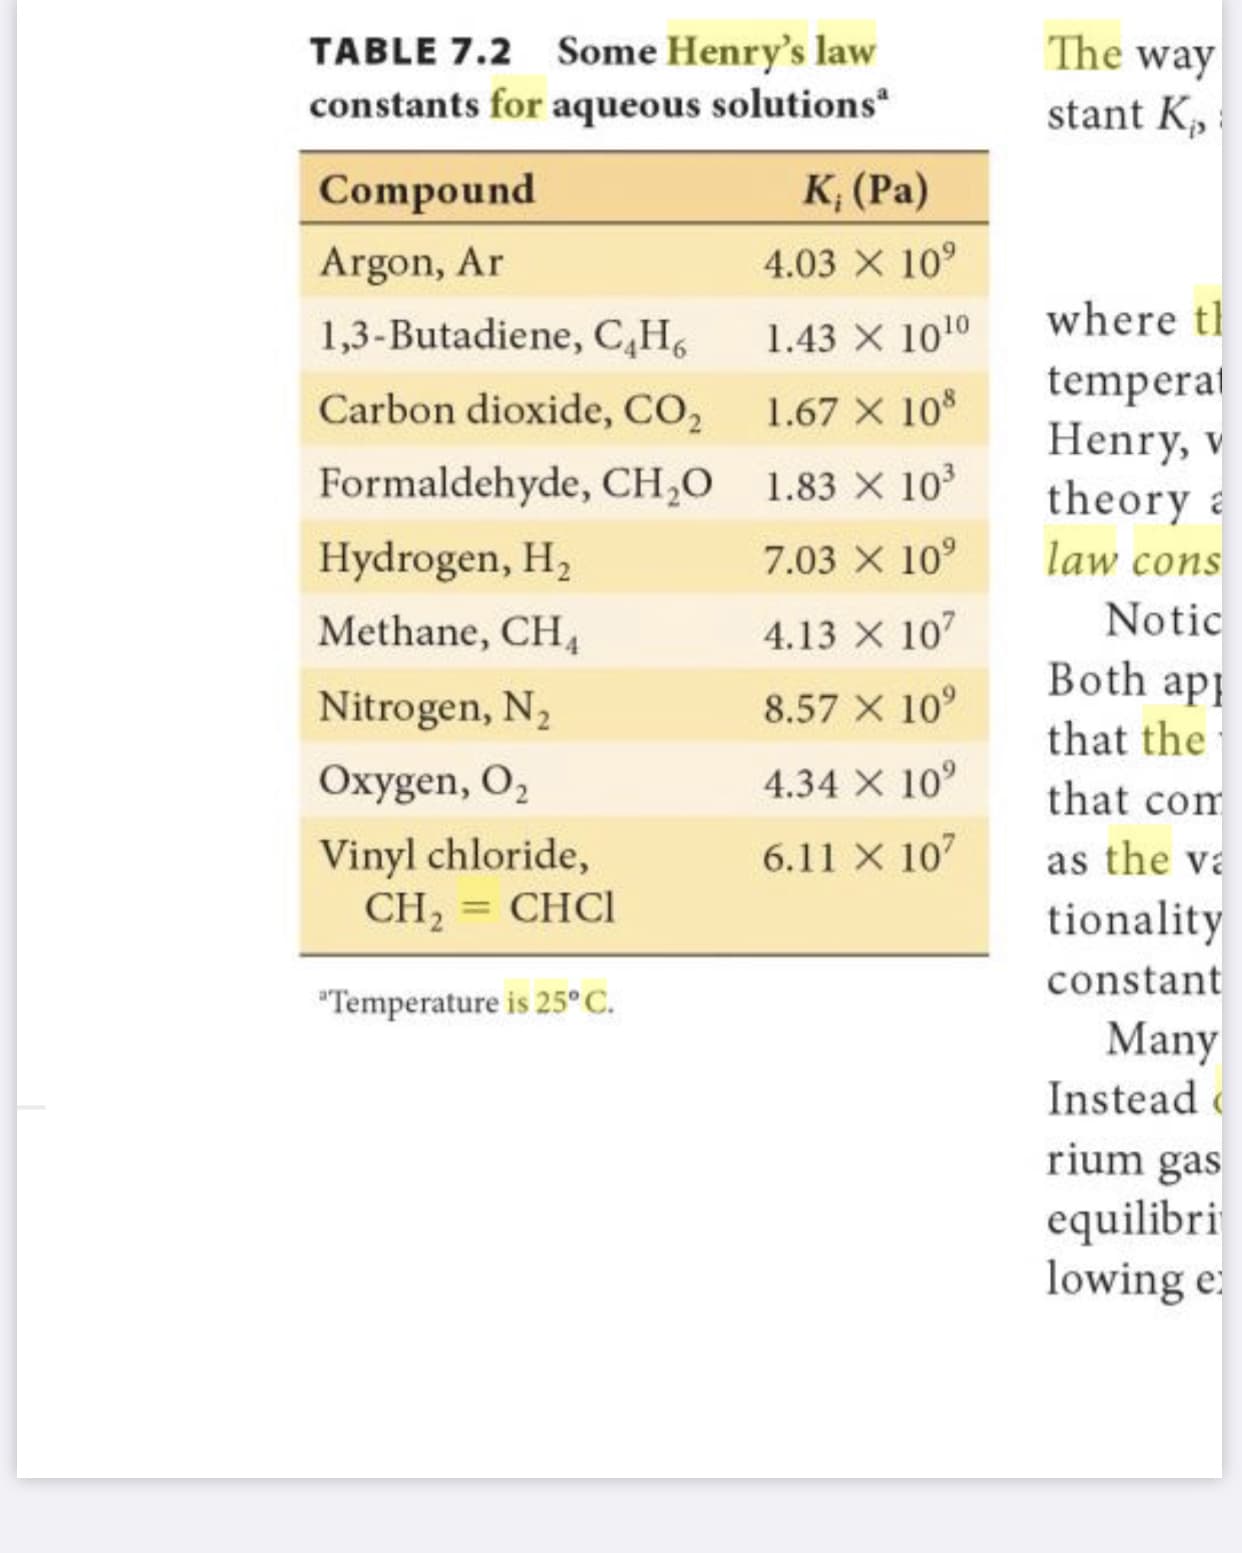 The way
TABLE 7.2 Some Henry's law
constants for aqueous solutions
stant K,
K, (Pa)
Compound
4.03 X 10°
Argon, Ar
where t!
1,3-Butadiene, C,H6
1.43 X 1010
temperat
Henry, v
theory a
law cons
Carbon dioxide, CO,
1.67 X 10
Formaldehyde, CH,0 1.83 X 10
Hydrogen, H,
7.03 X 10°
Notic
Methane, CH,
4.13 X 107
Both app
Nitrogen, N2
8.57 X 10°
that the
Oxygen, O,
4.34 X 10°
that com
Vinyl chloride,
CH2 = CHCI
6.11 X 107
as the va
tionality
constant
"Temperature is 25° C.
Many
Instead
rium gas
equilibri
lowing e:
